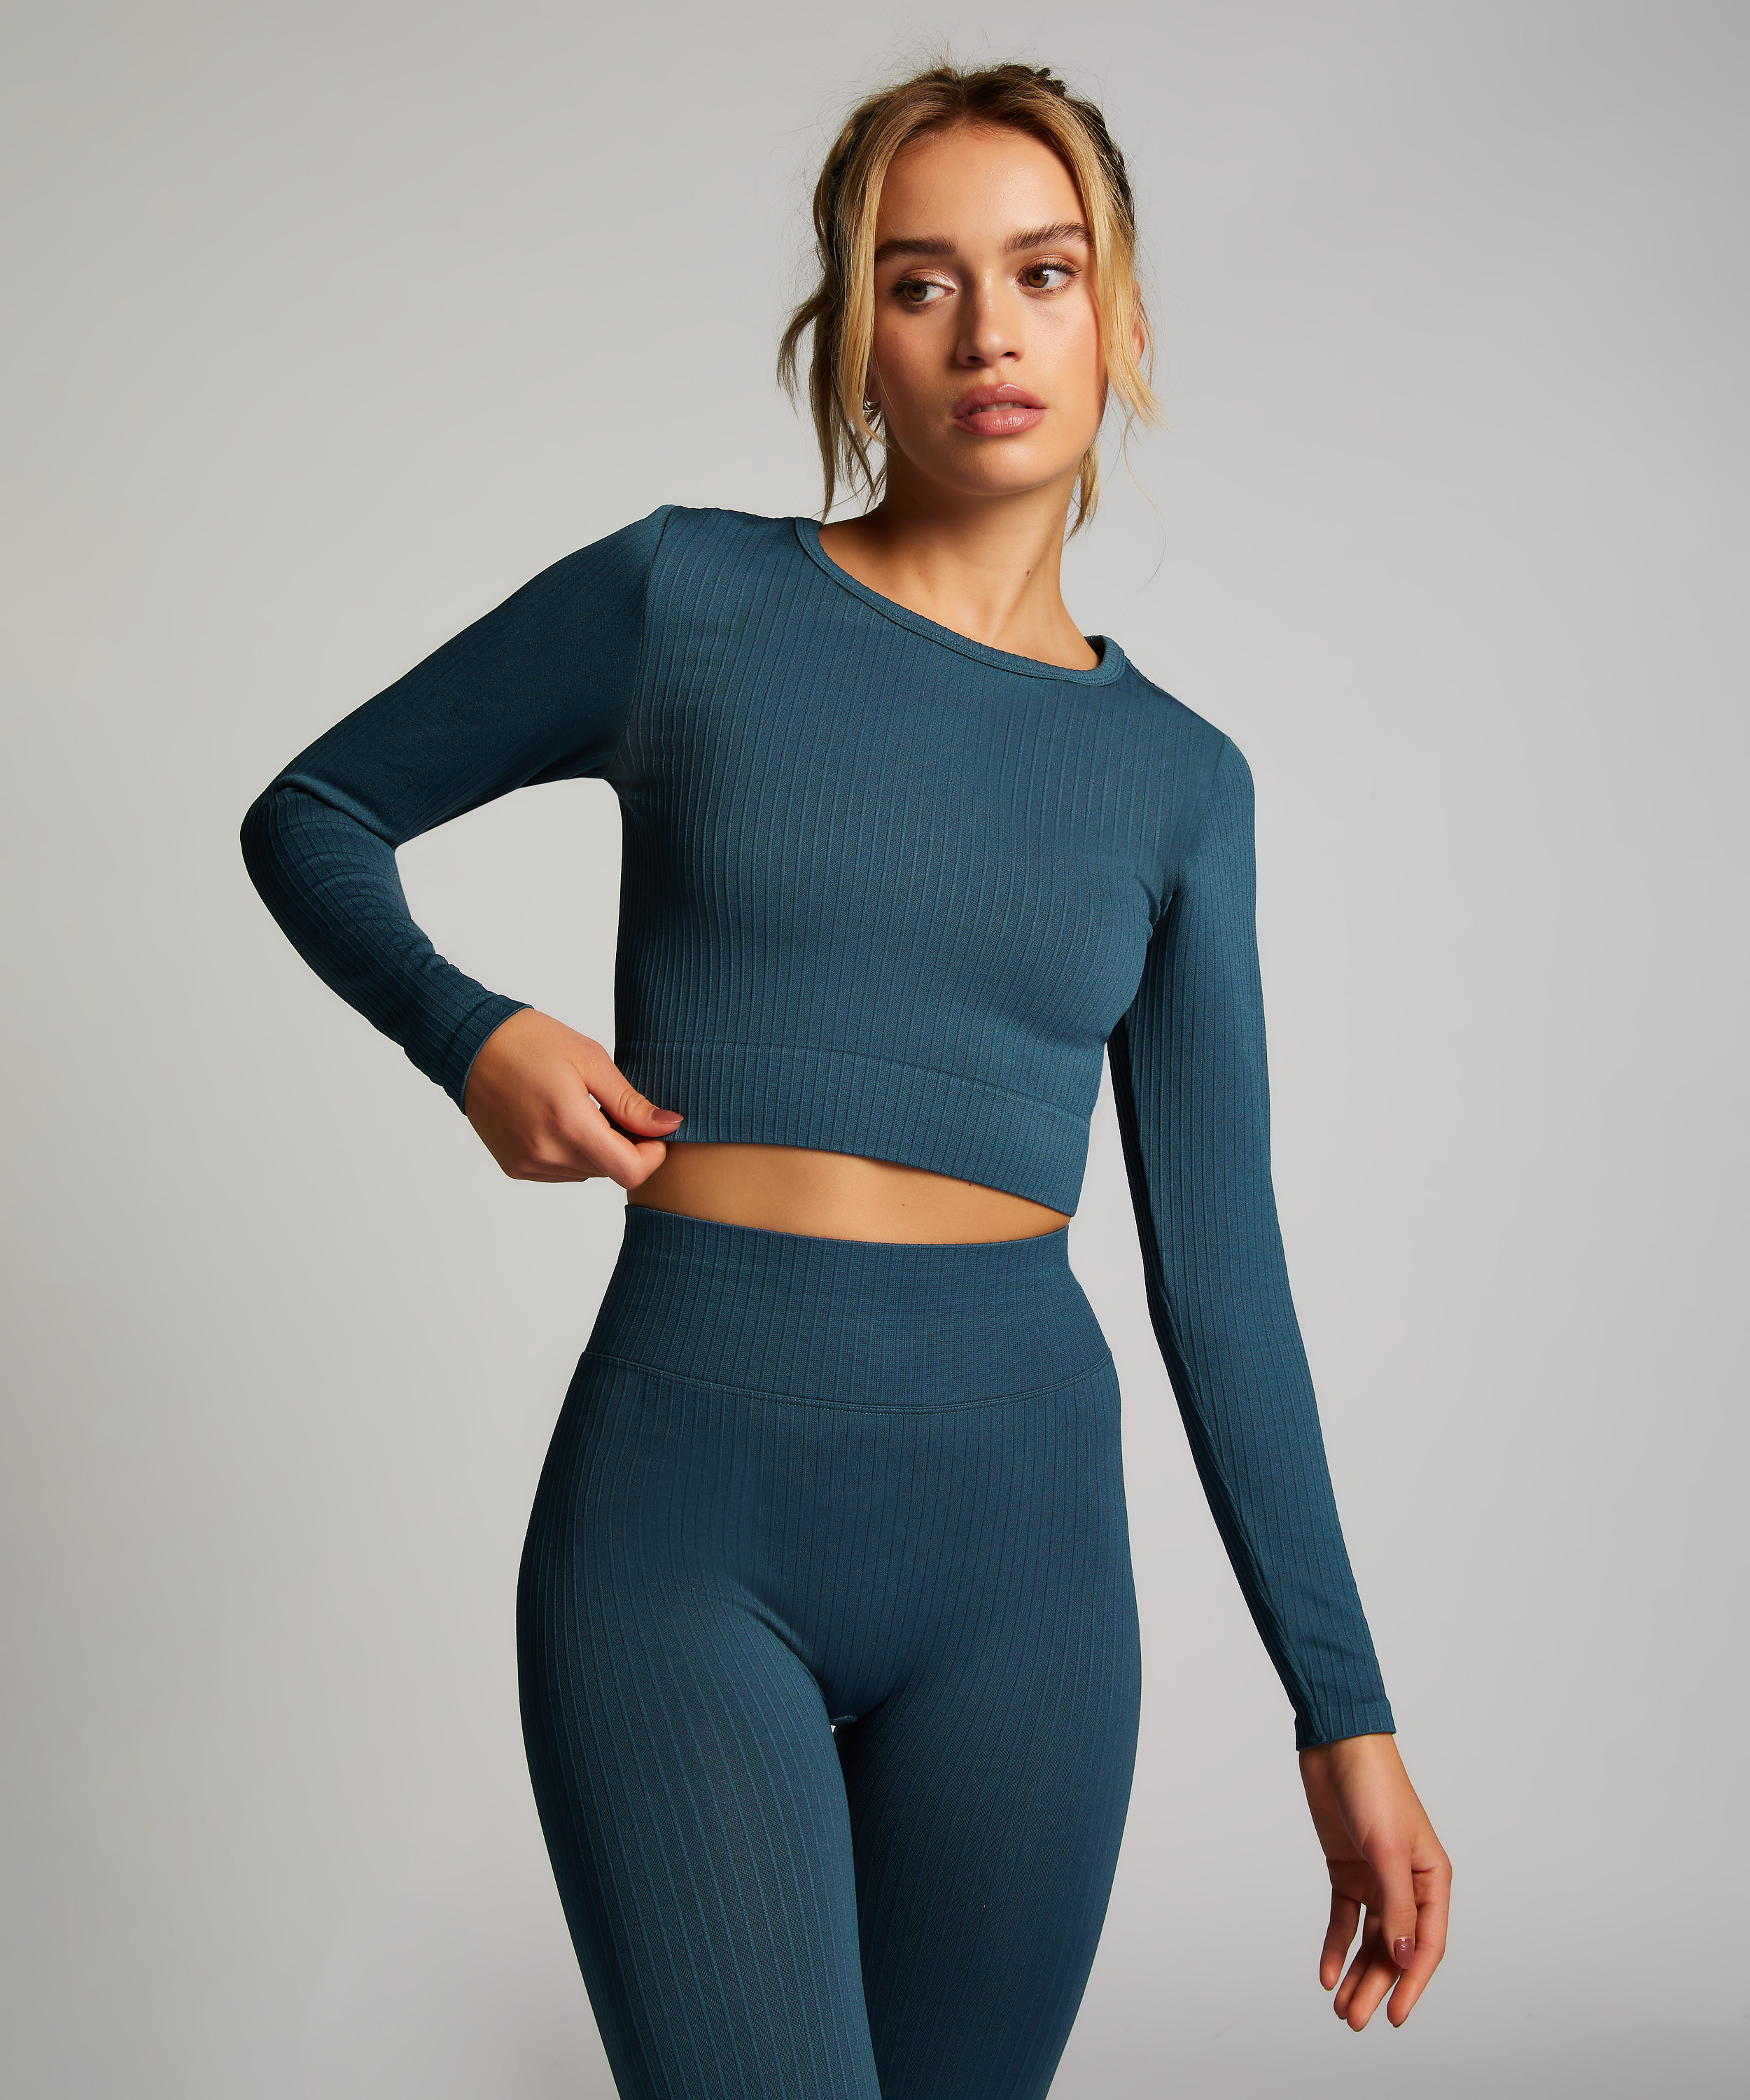 HKMX Sport cropped top Seamless, Blauw, main